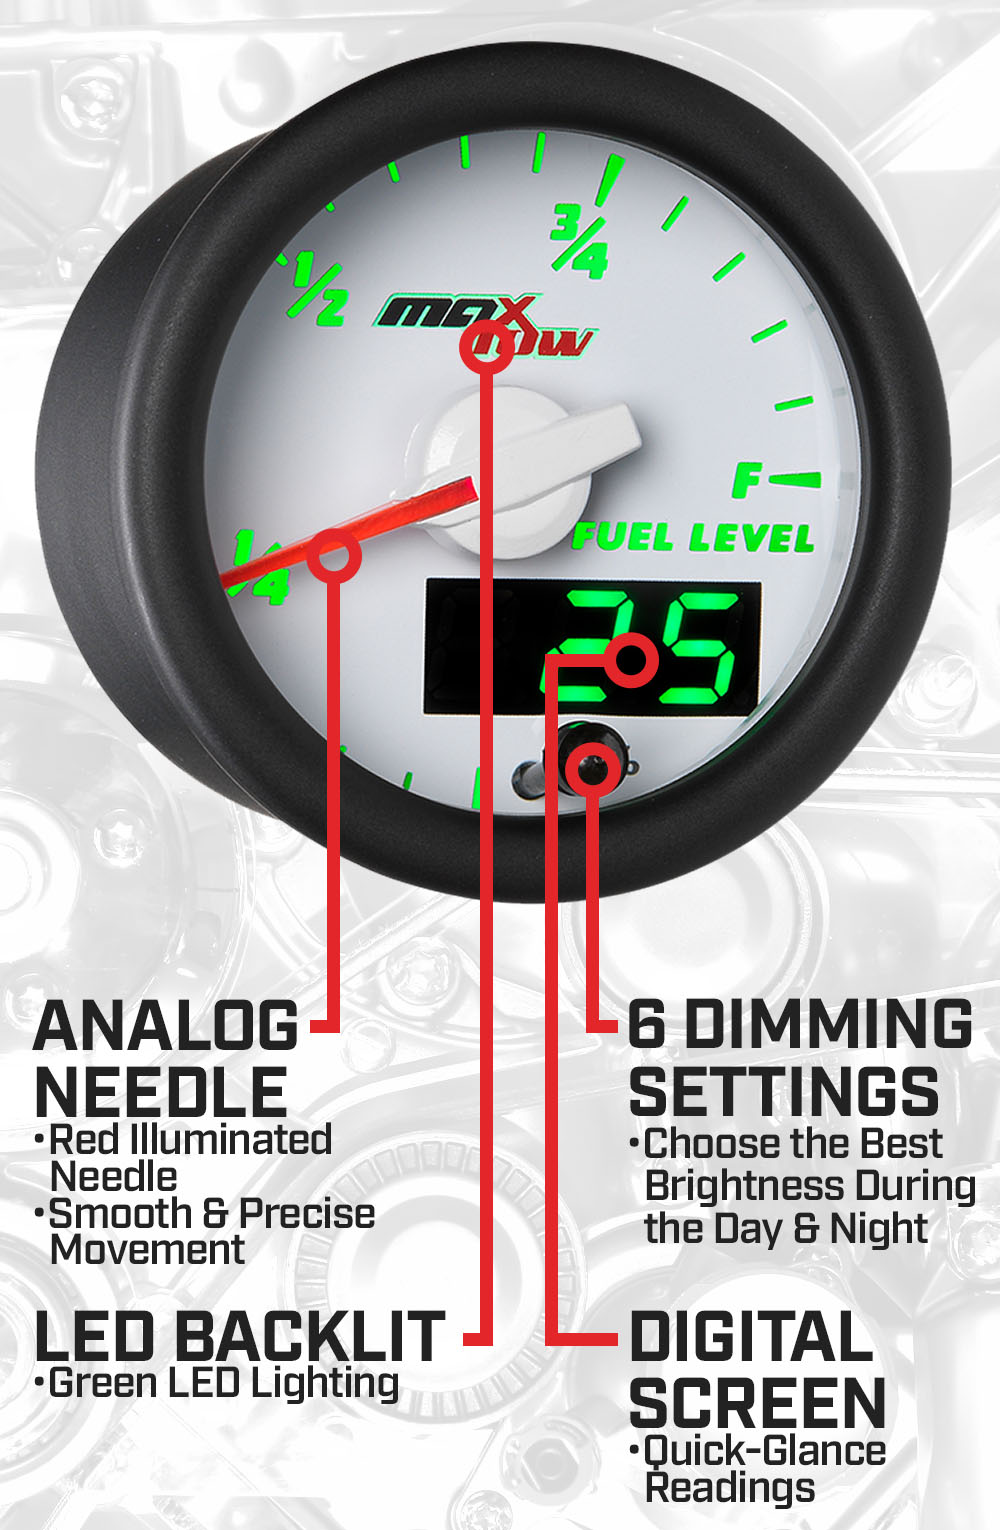 White & Green Double Vision Fuel Level Gauge Features